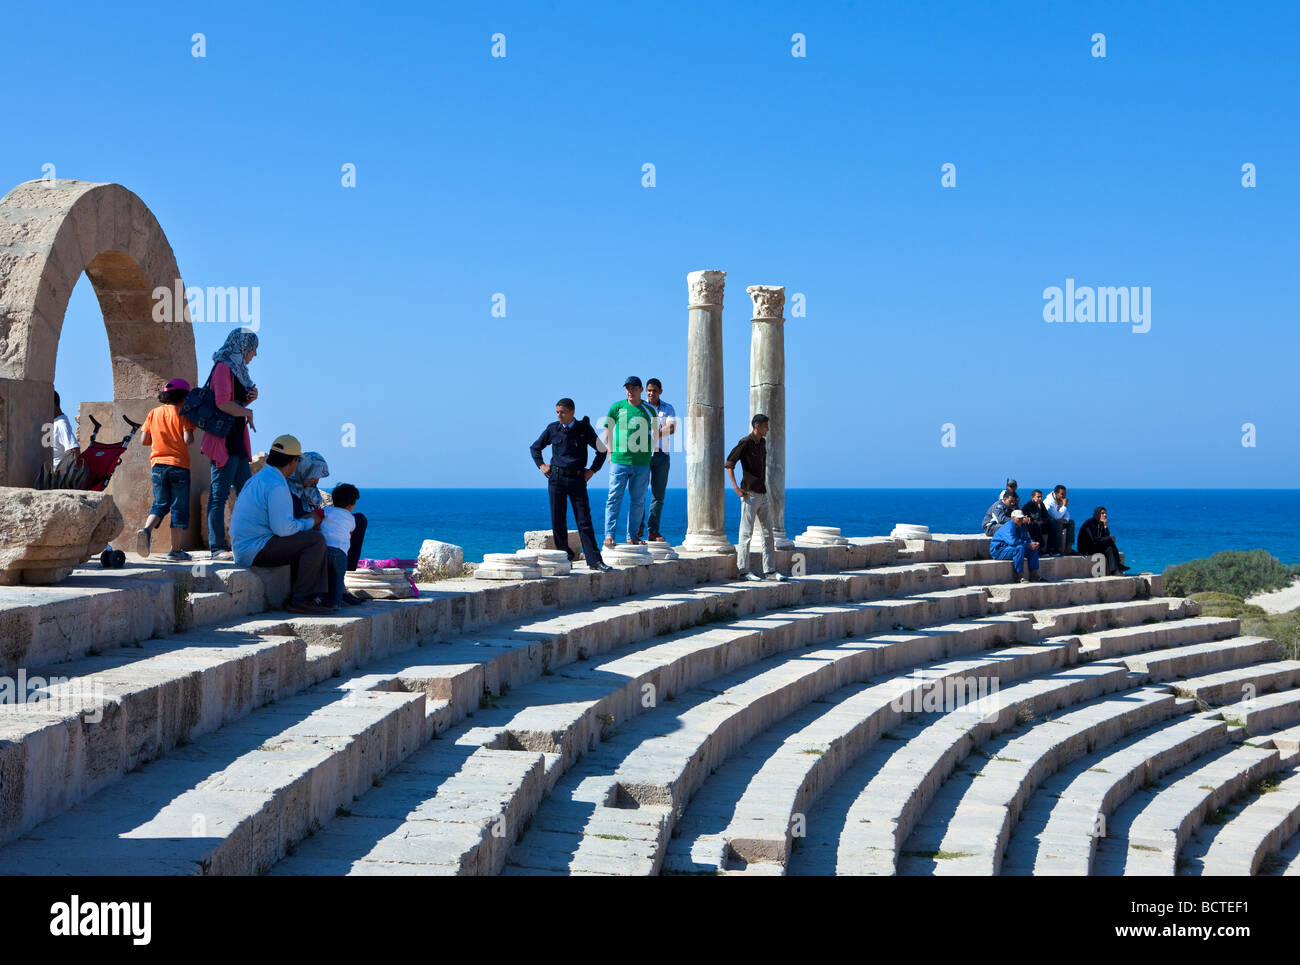 Libya archaeological site of Leptis Magna the theatre Stock Photo